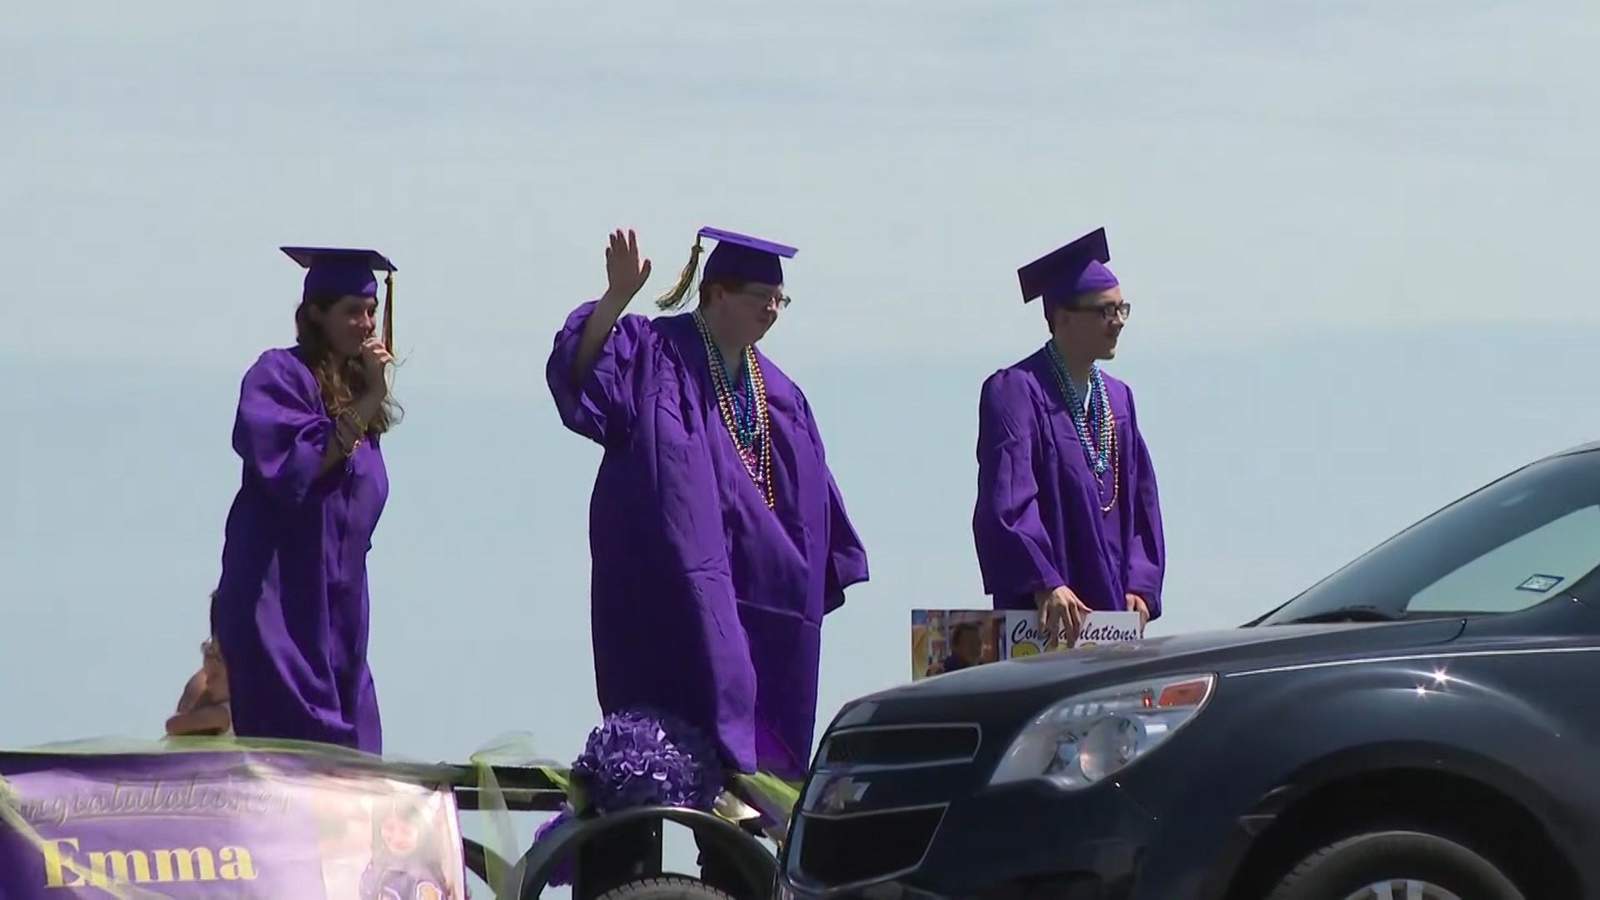 Galveston Ball High school seniors honored with parade while decked out in cap and gowns